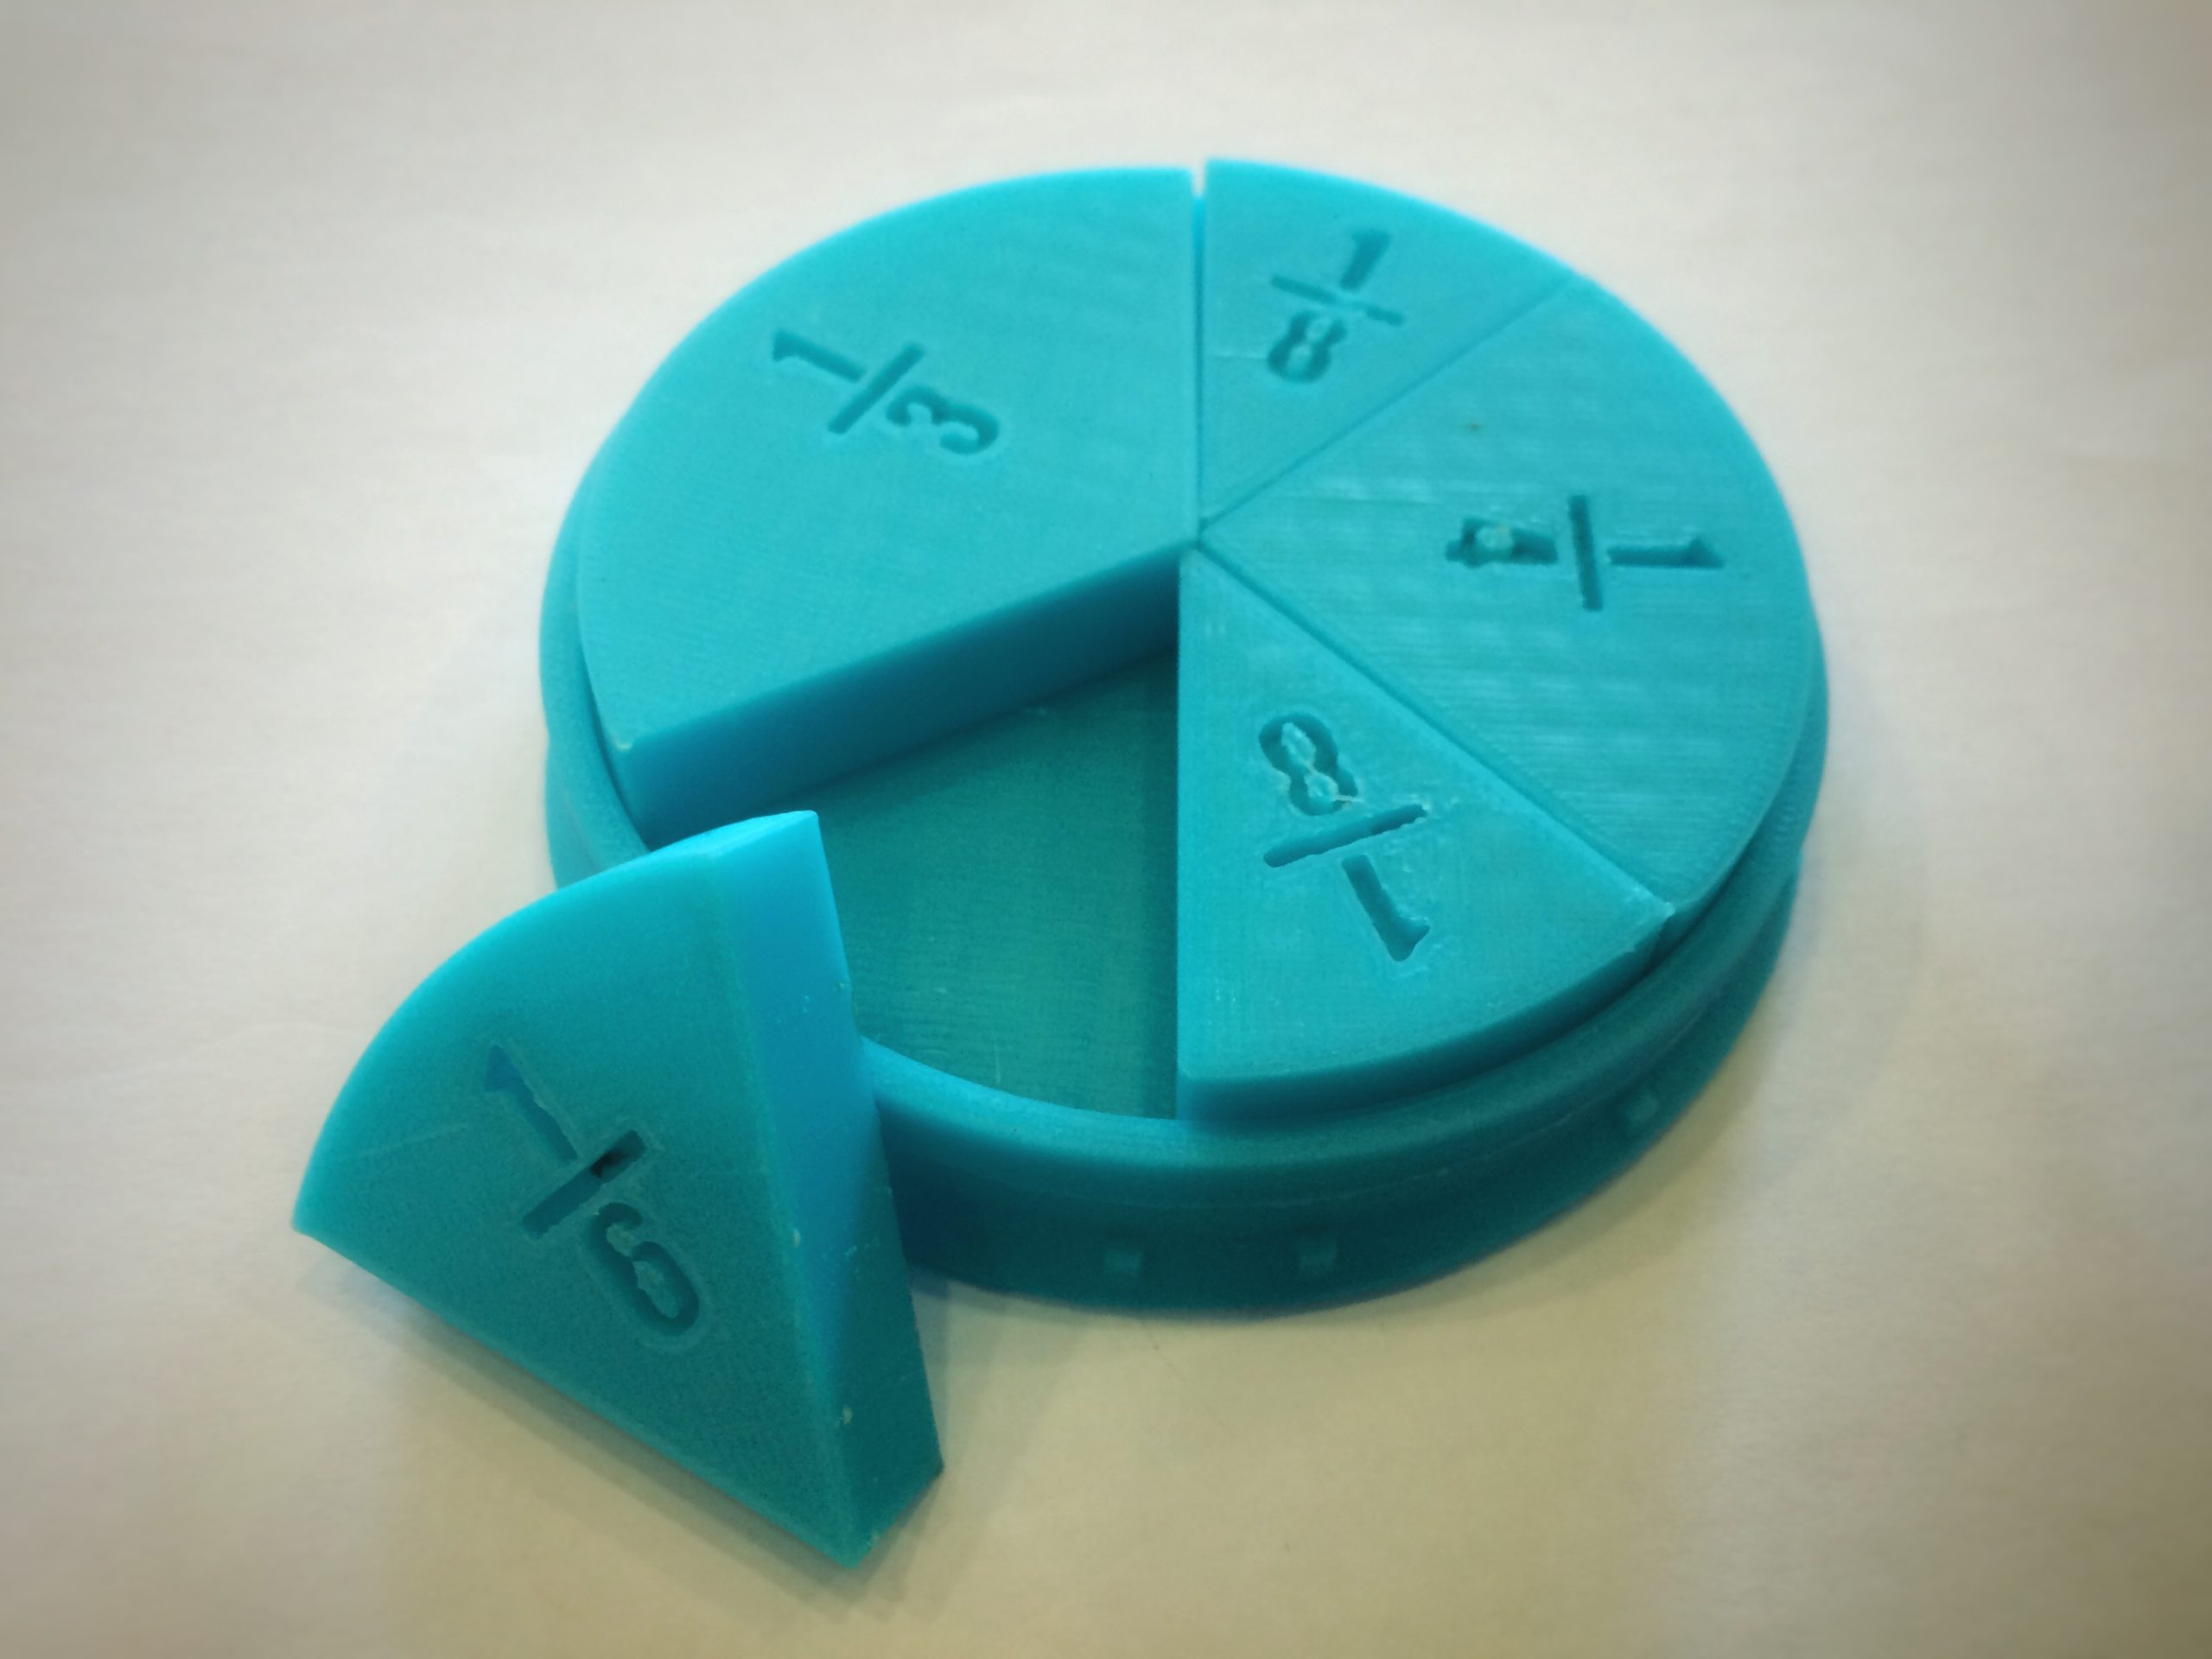 A close up photo of a plastic 3D printed object in aqua plastic. The object is a math teaching aid.